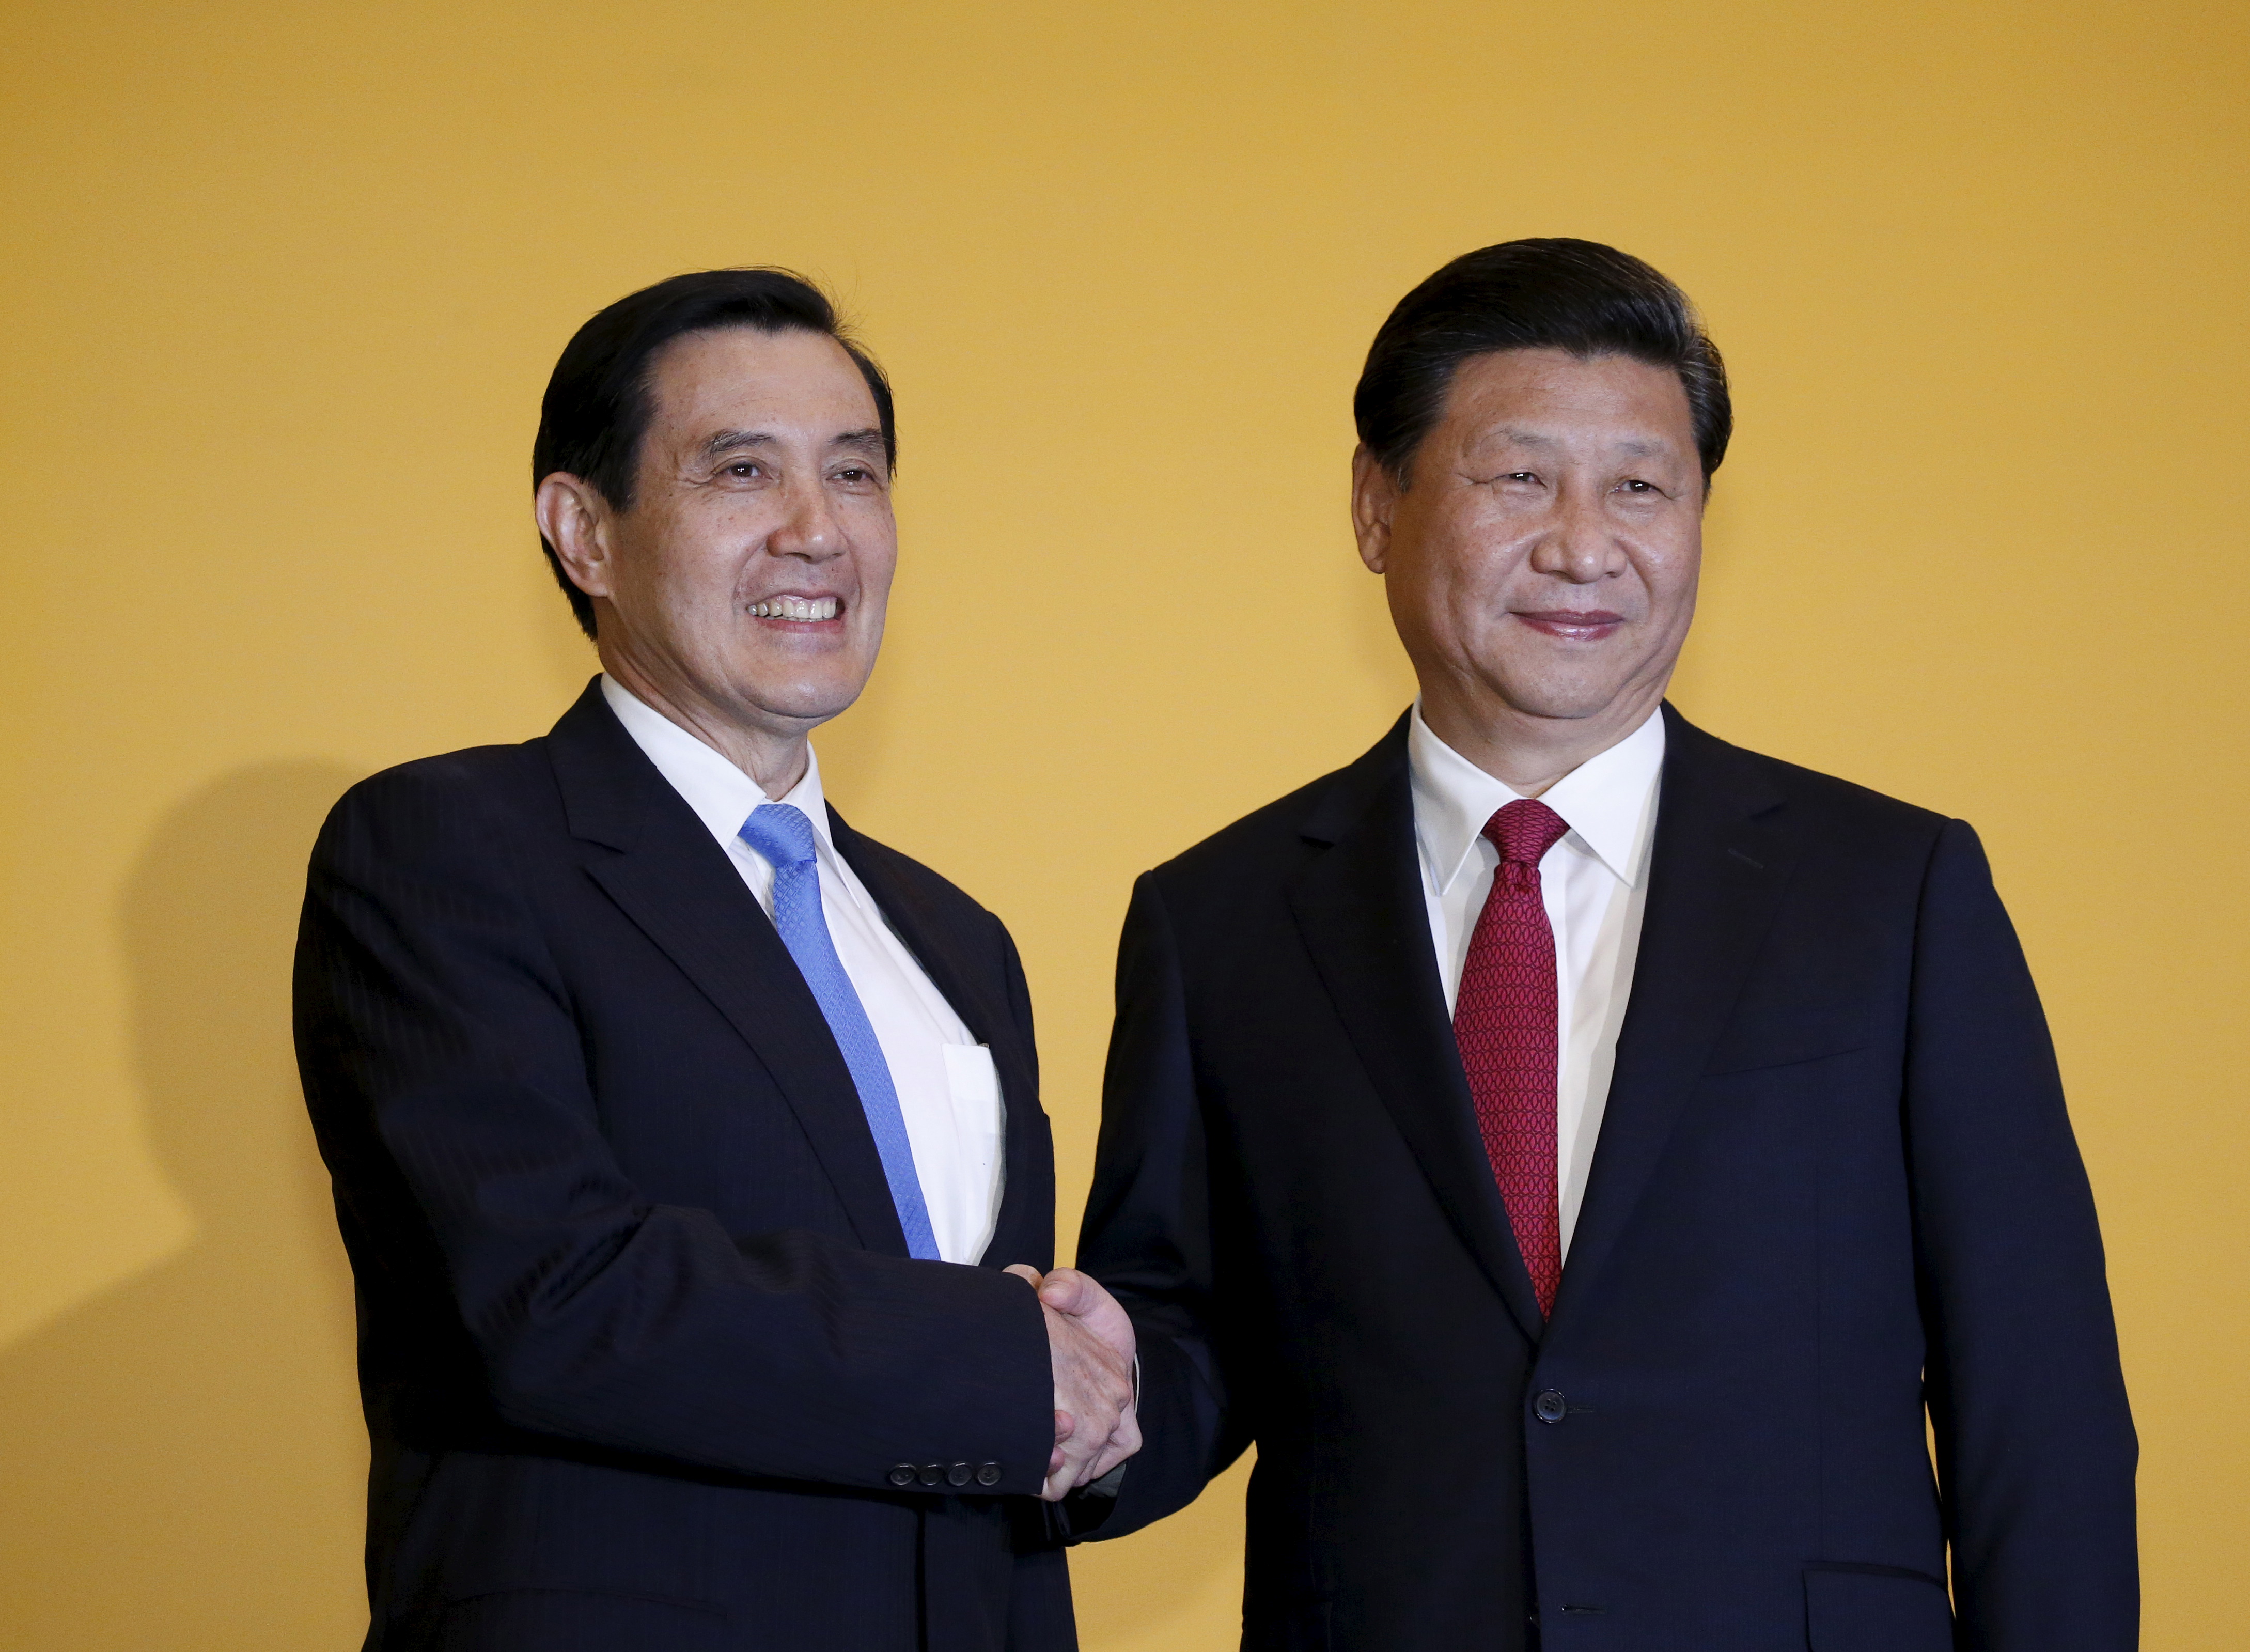 Chinese President Xi Jinping shakes hands with Taiwan's President Ma Ying-jeou during a summit in Singapore 